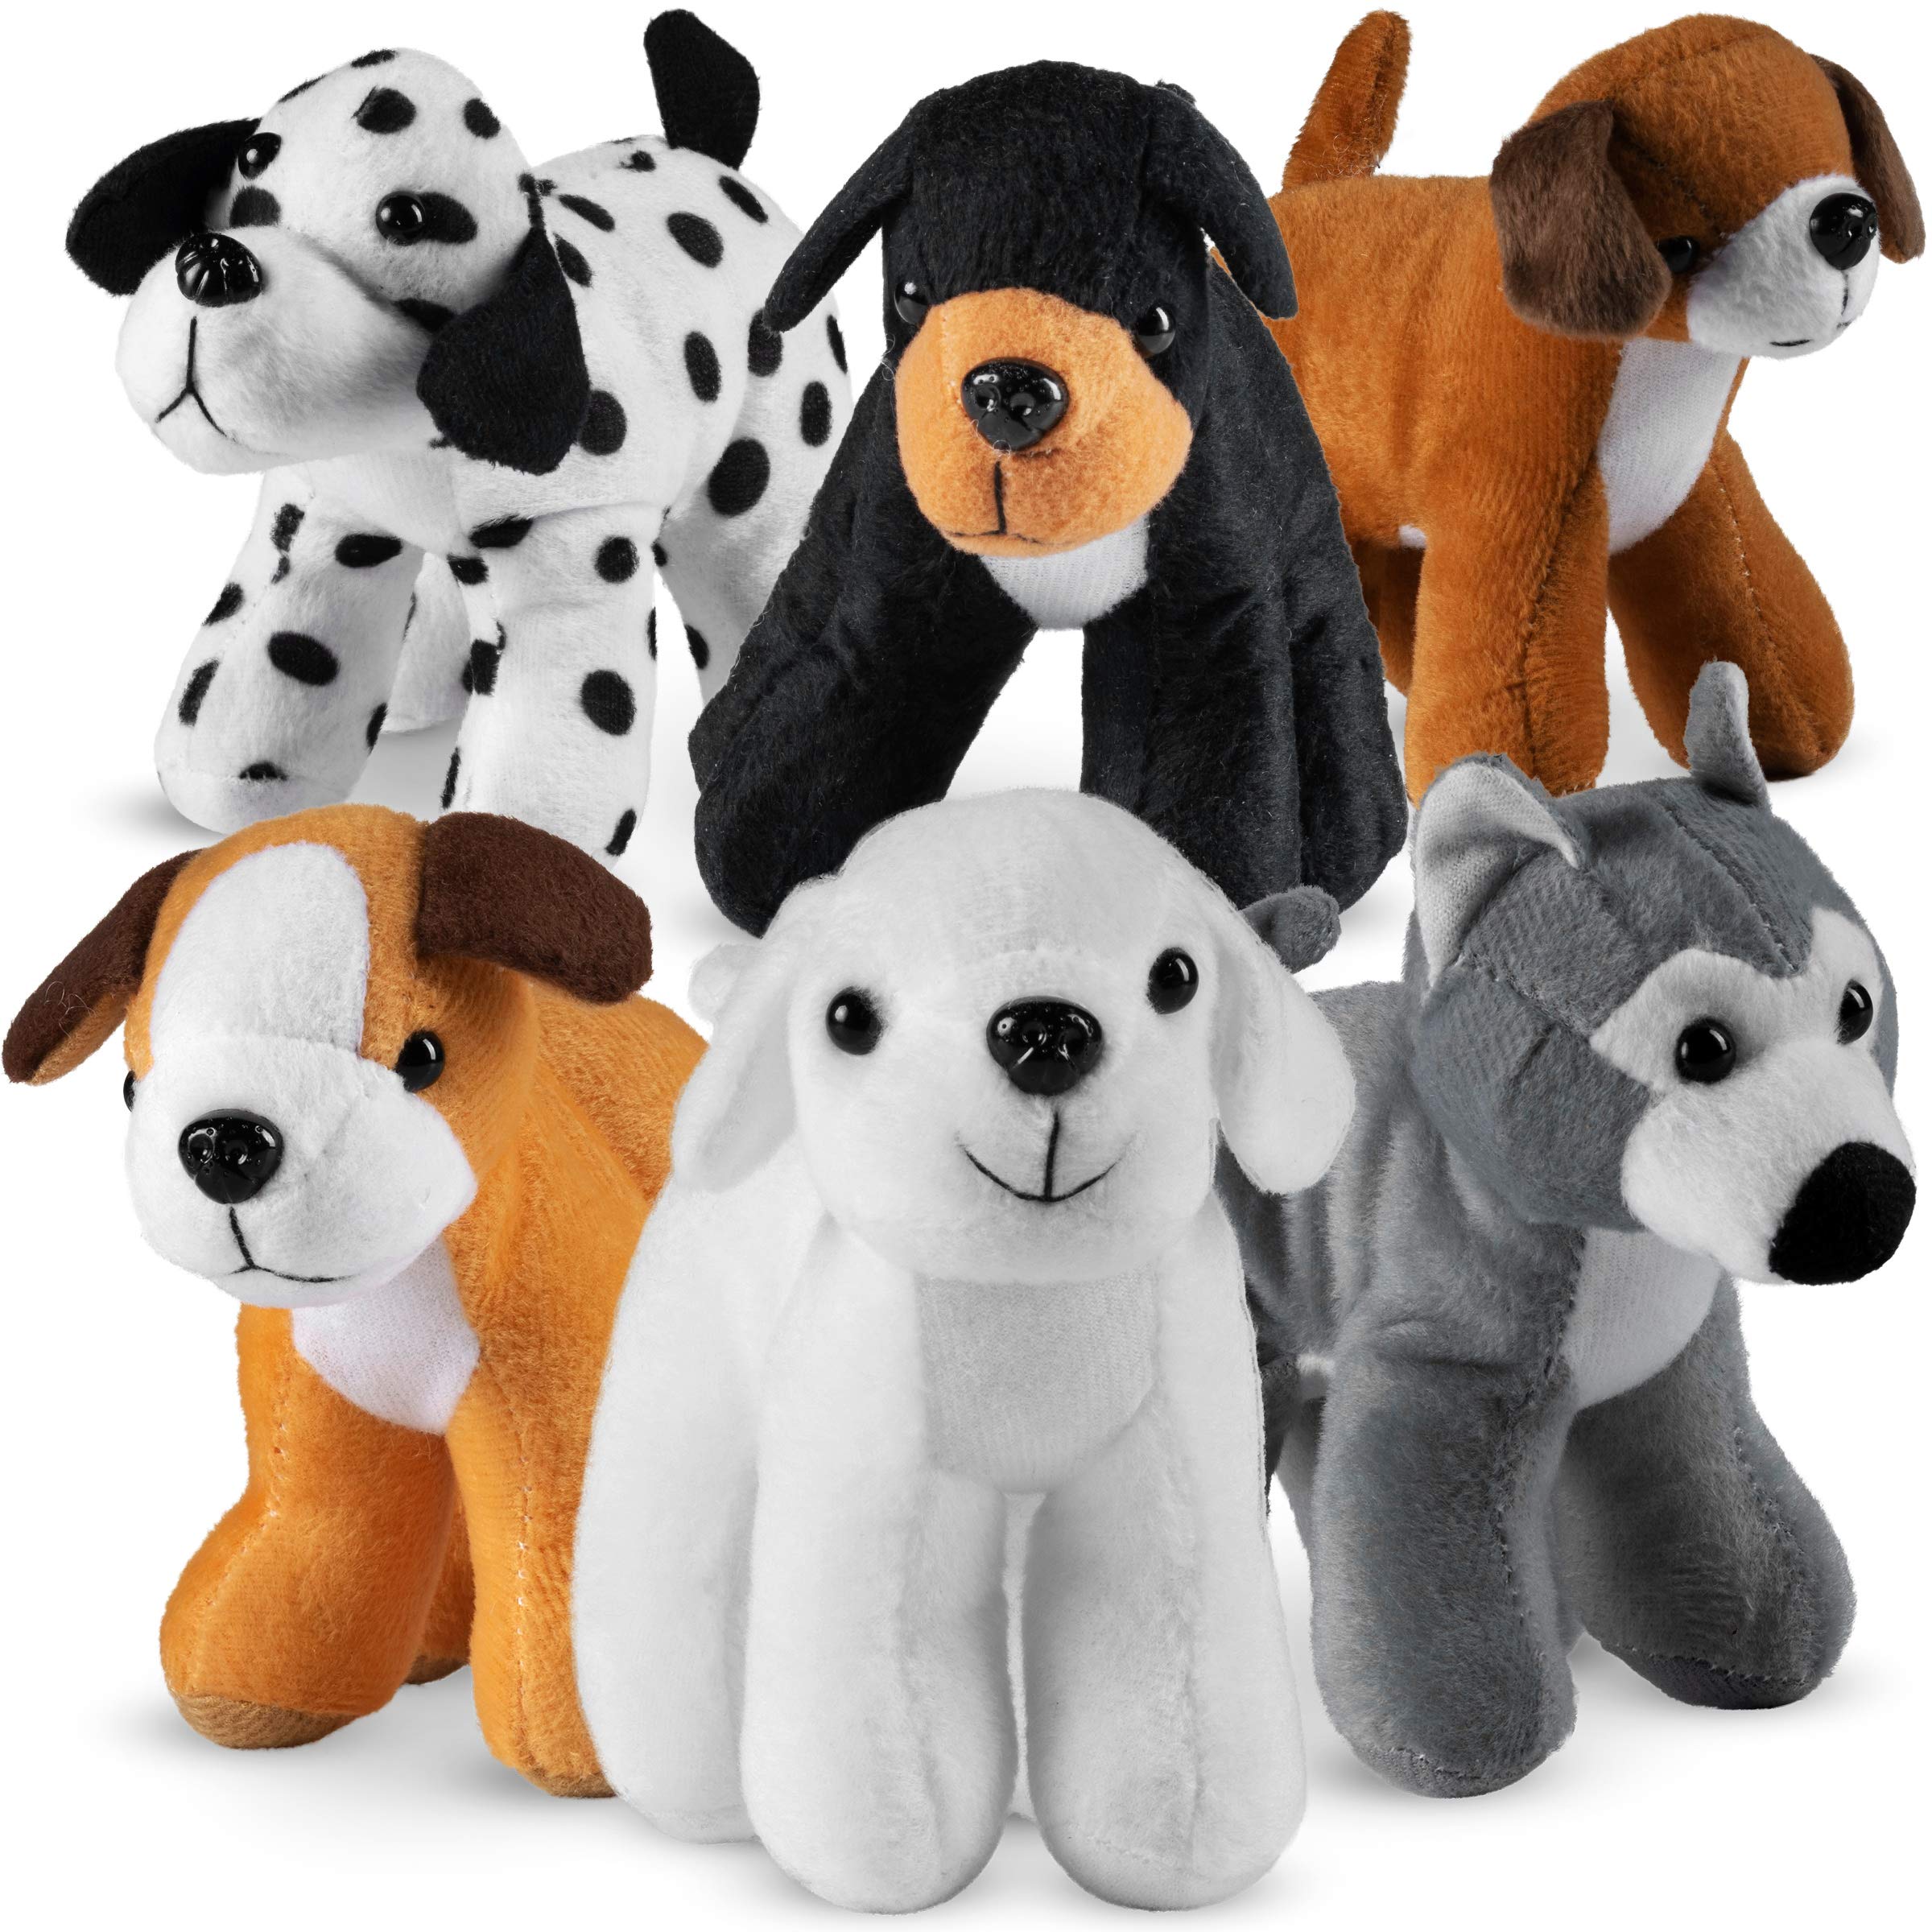 6 stuffed animals - dogs each of a different color and breed.